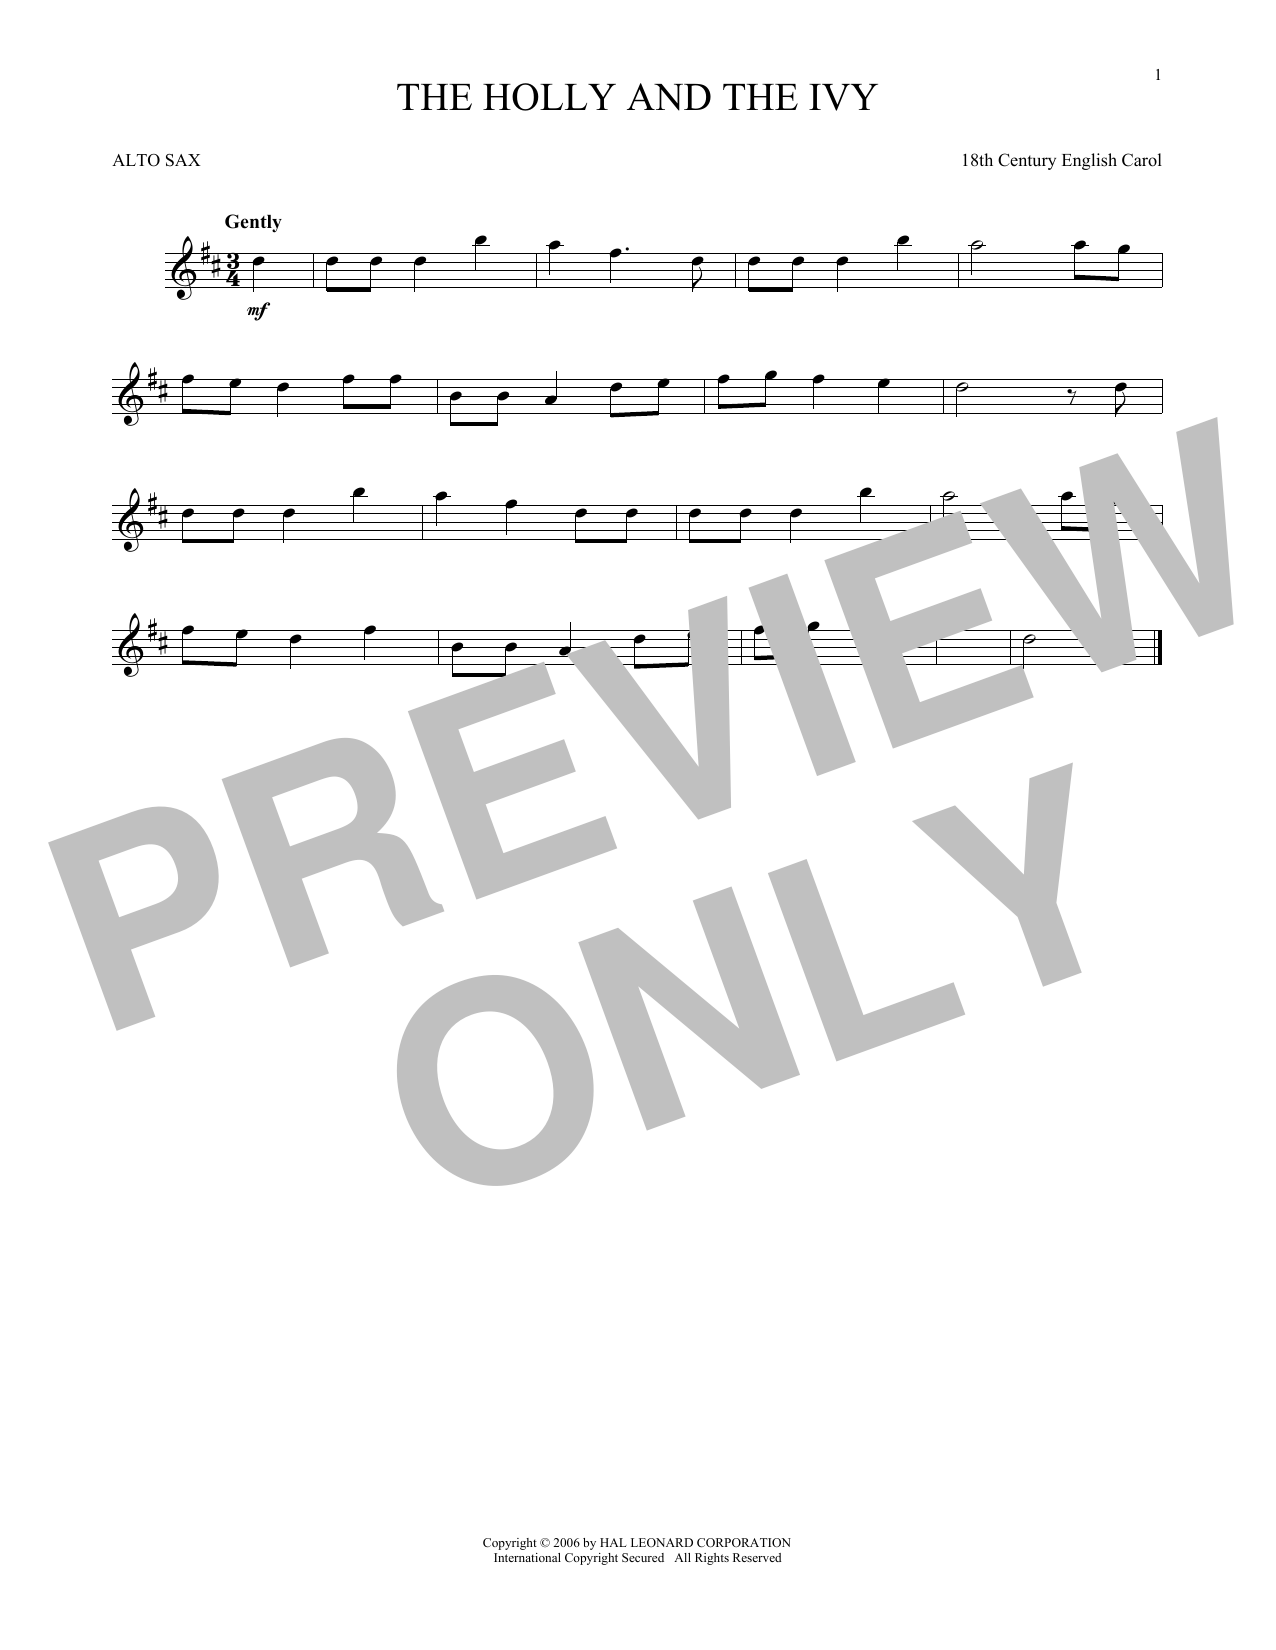 18th Century English Carol The Holly And The Ivy sheet music notes printable PDF score